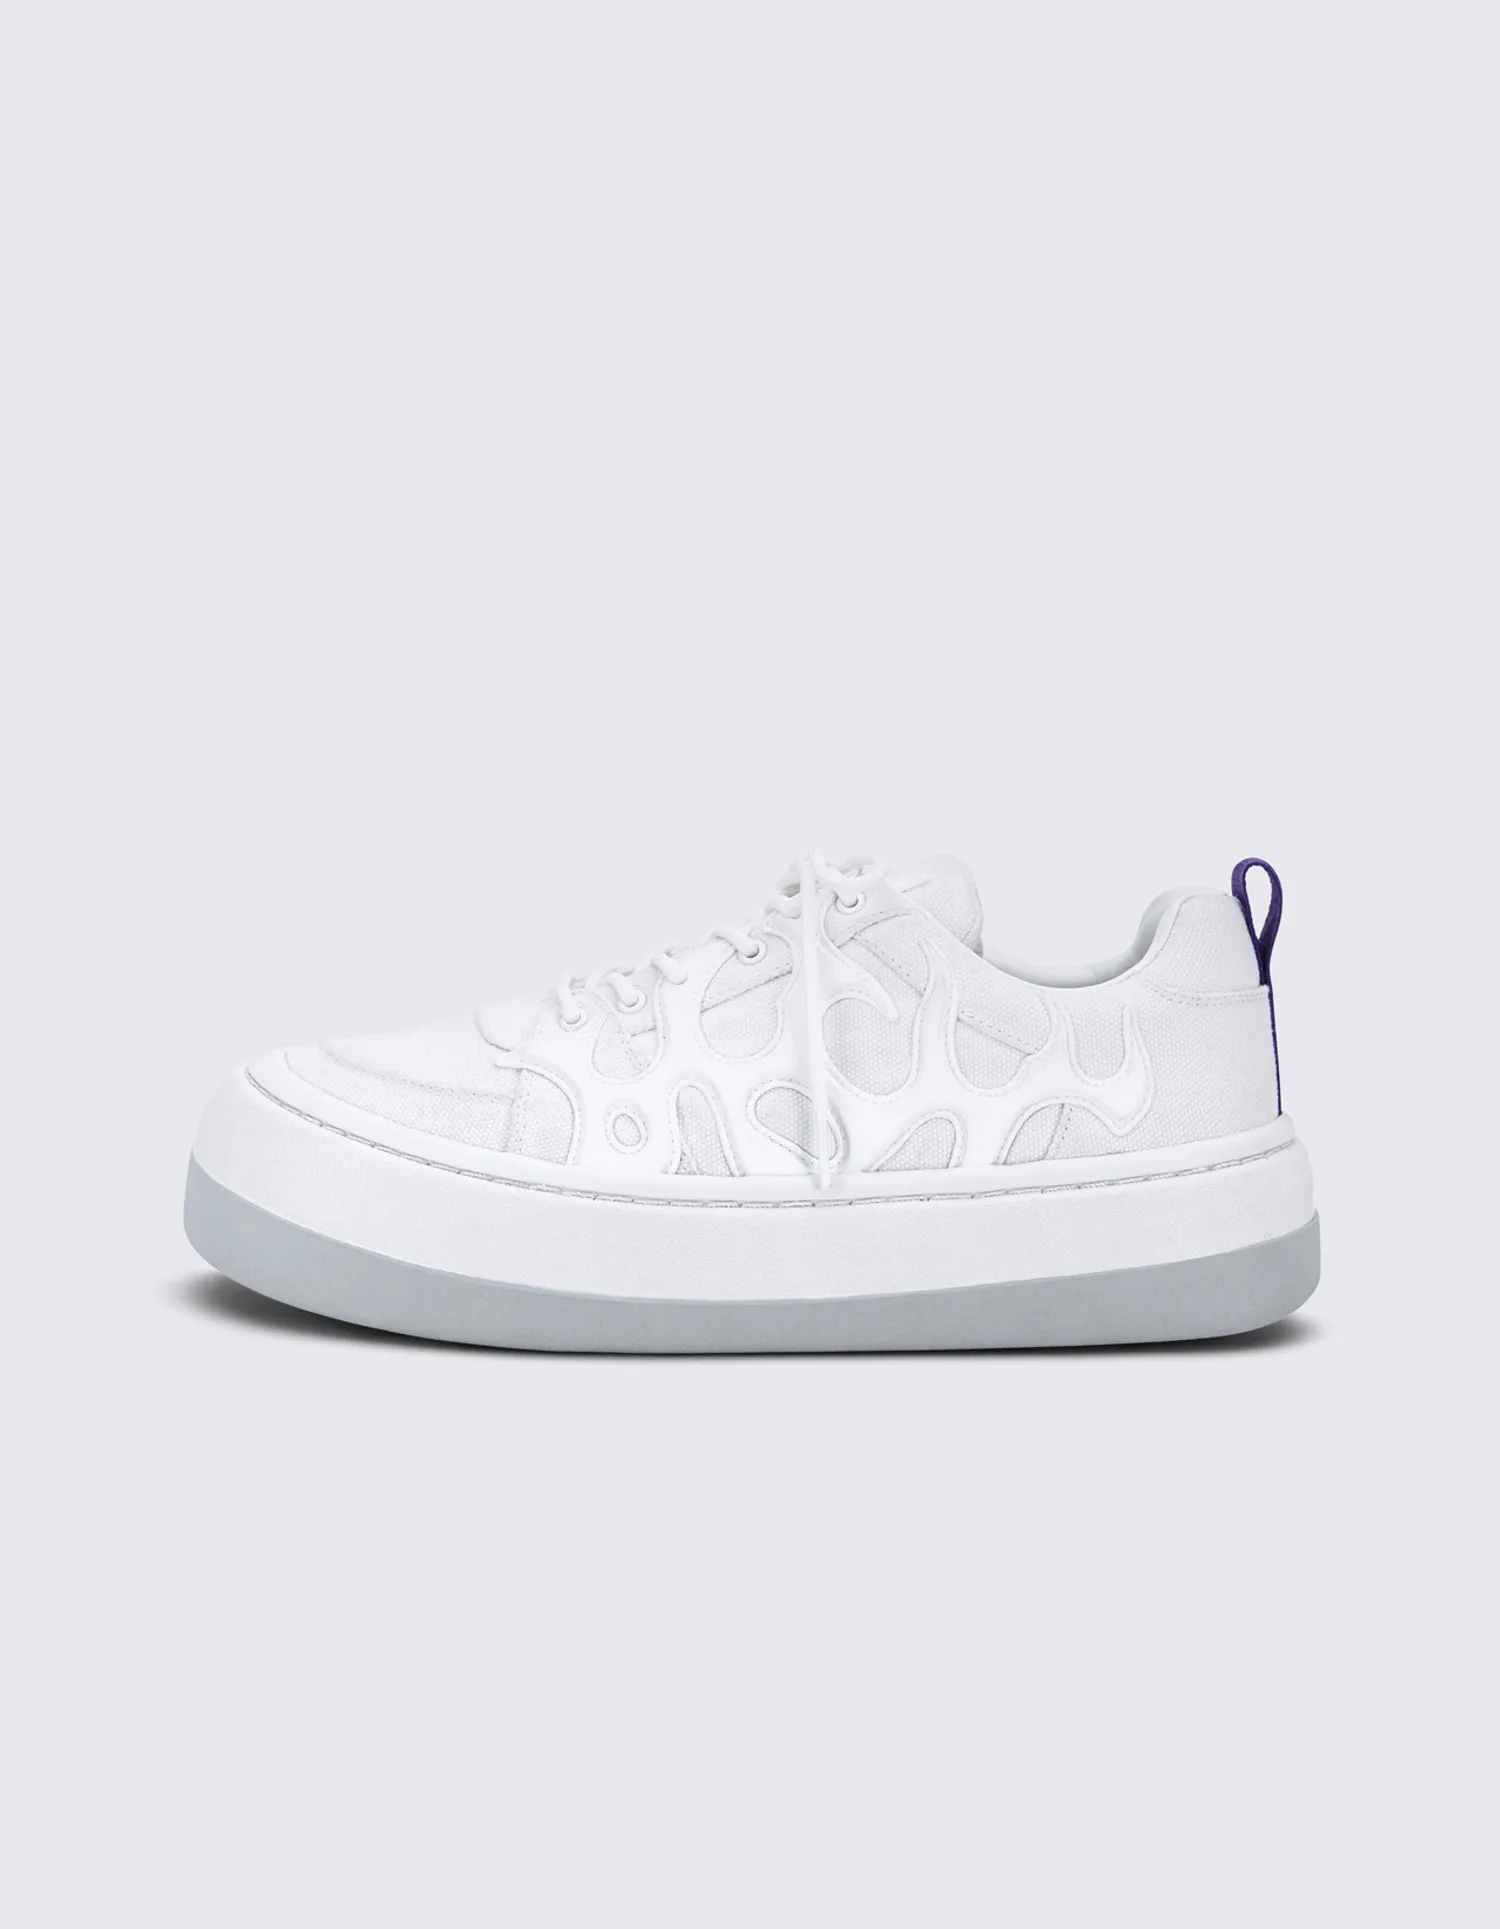 Eytys Sonic Canvas Bright White Sneakers